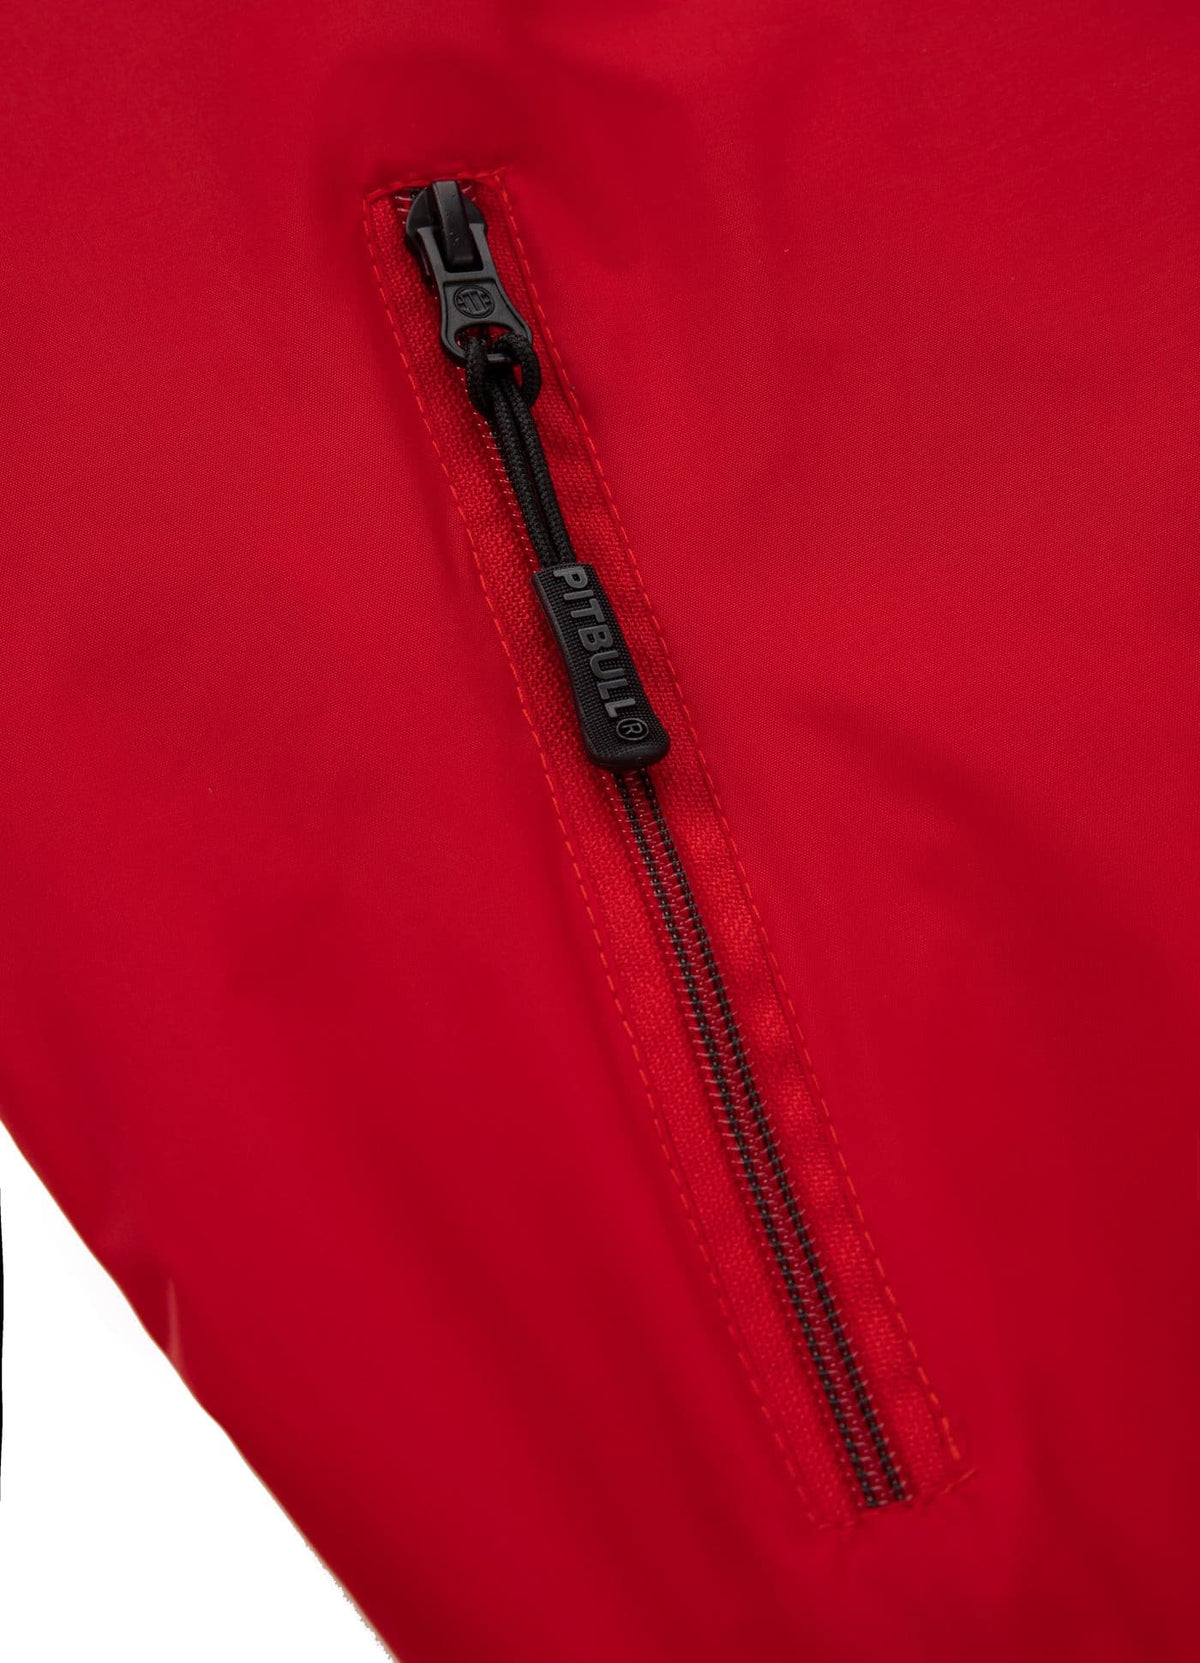 ATHLETIC Red Jacket.